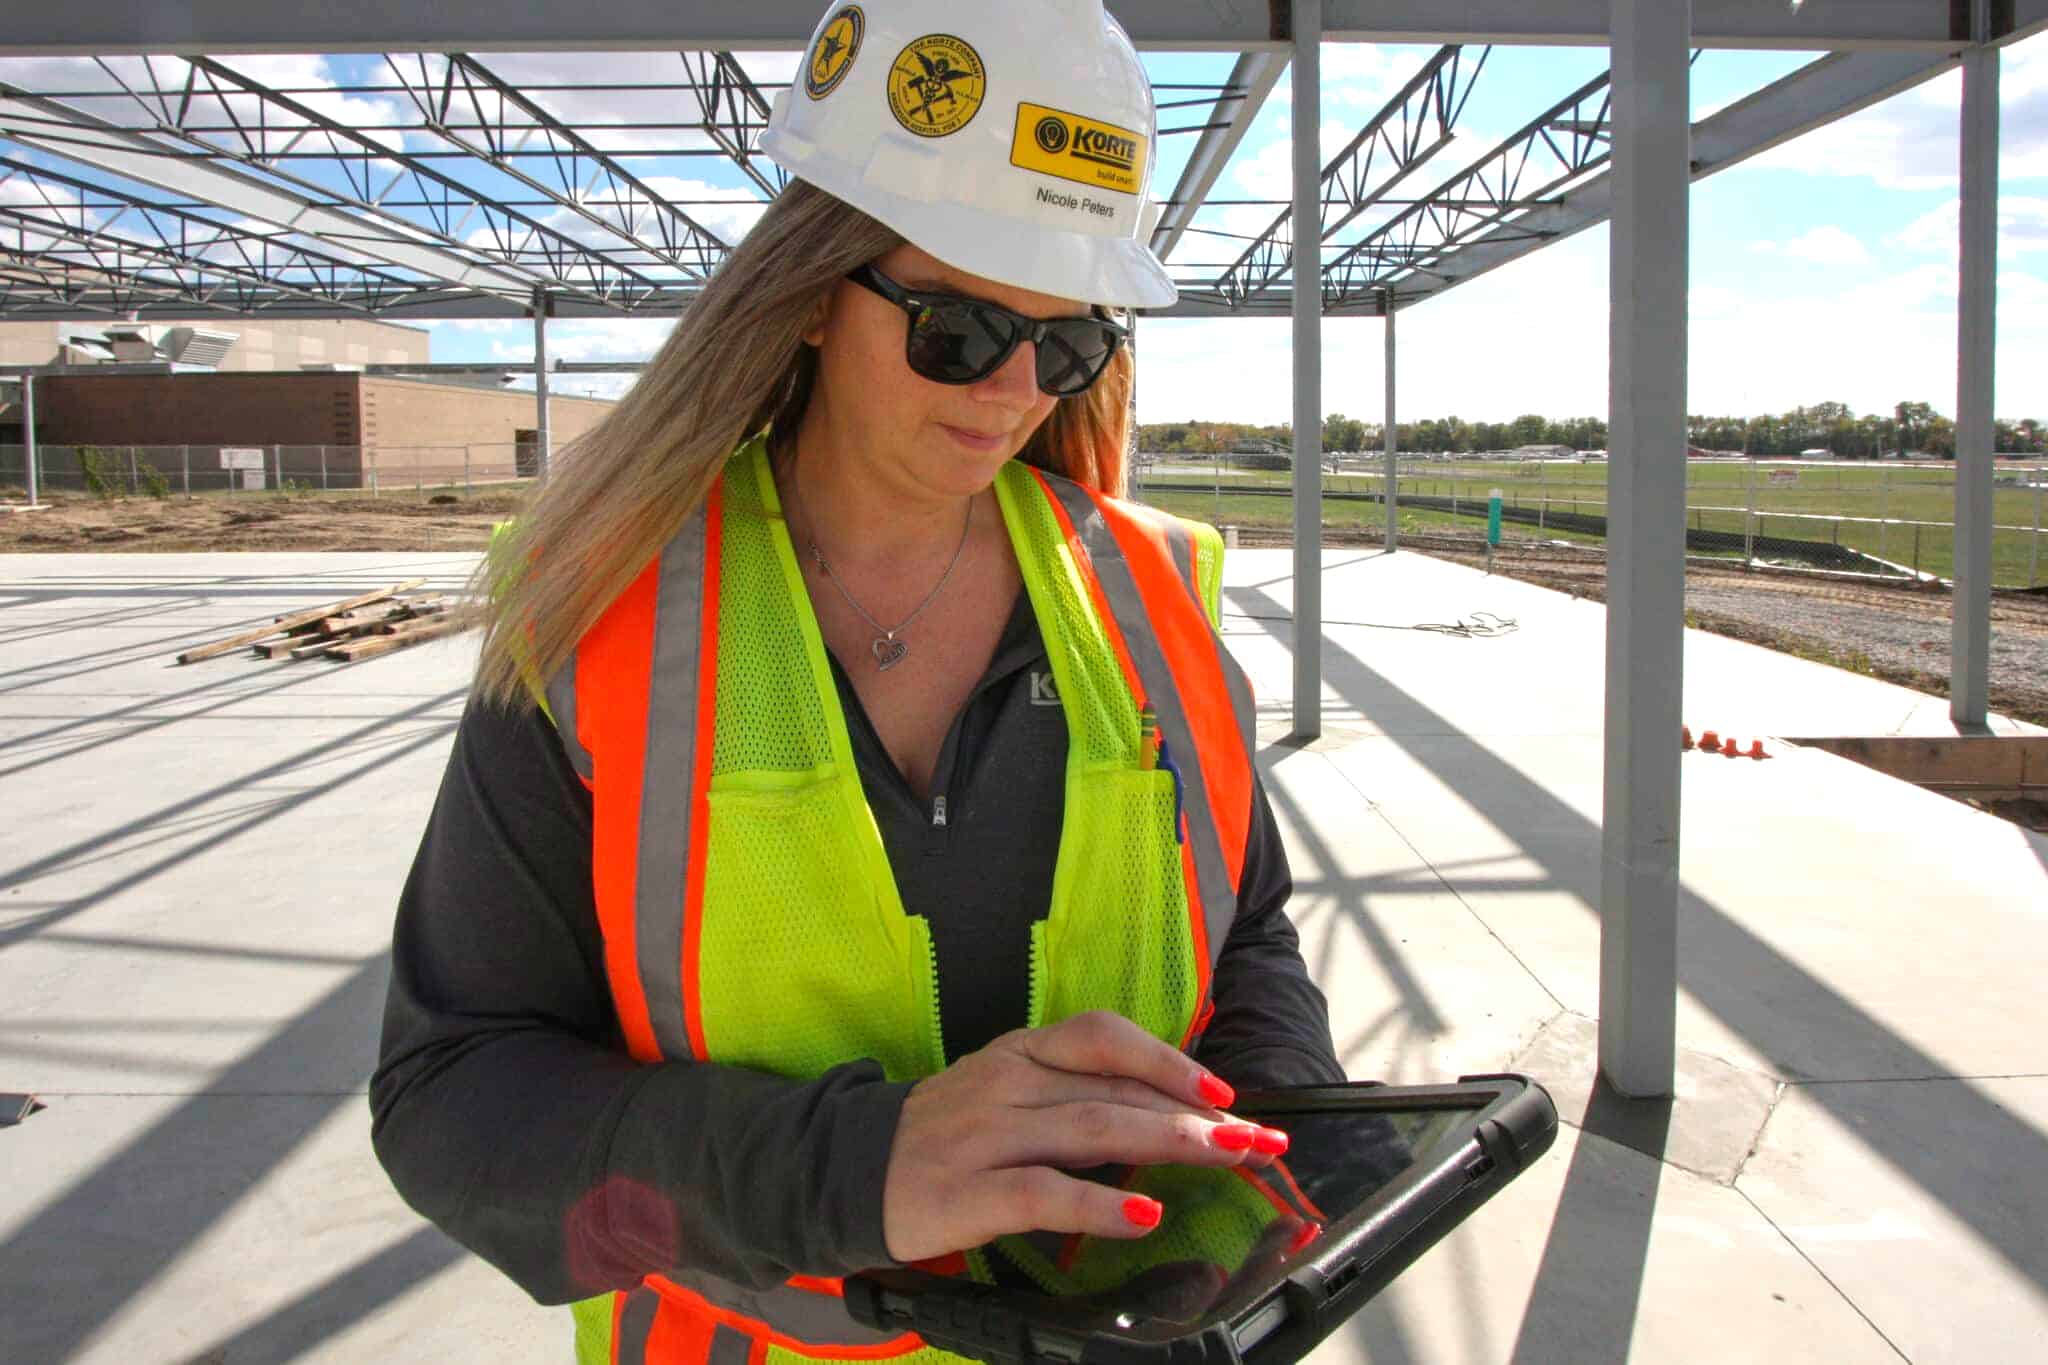 Nicole Peters in a hard hat and safety vest on an active job site with an iPad in hand. This image is meant to illustrate her role as an IT expert within a construction company.